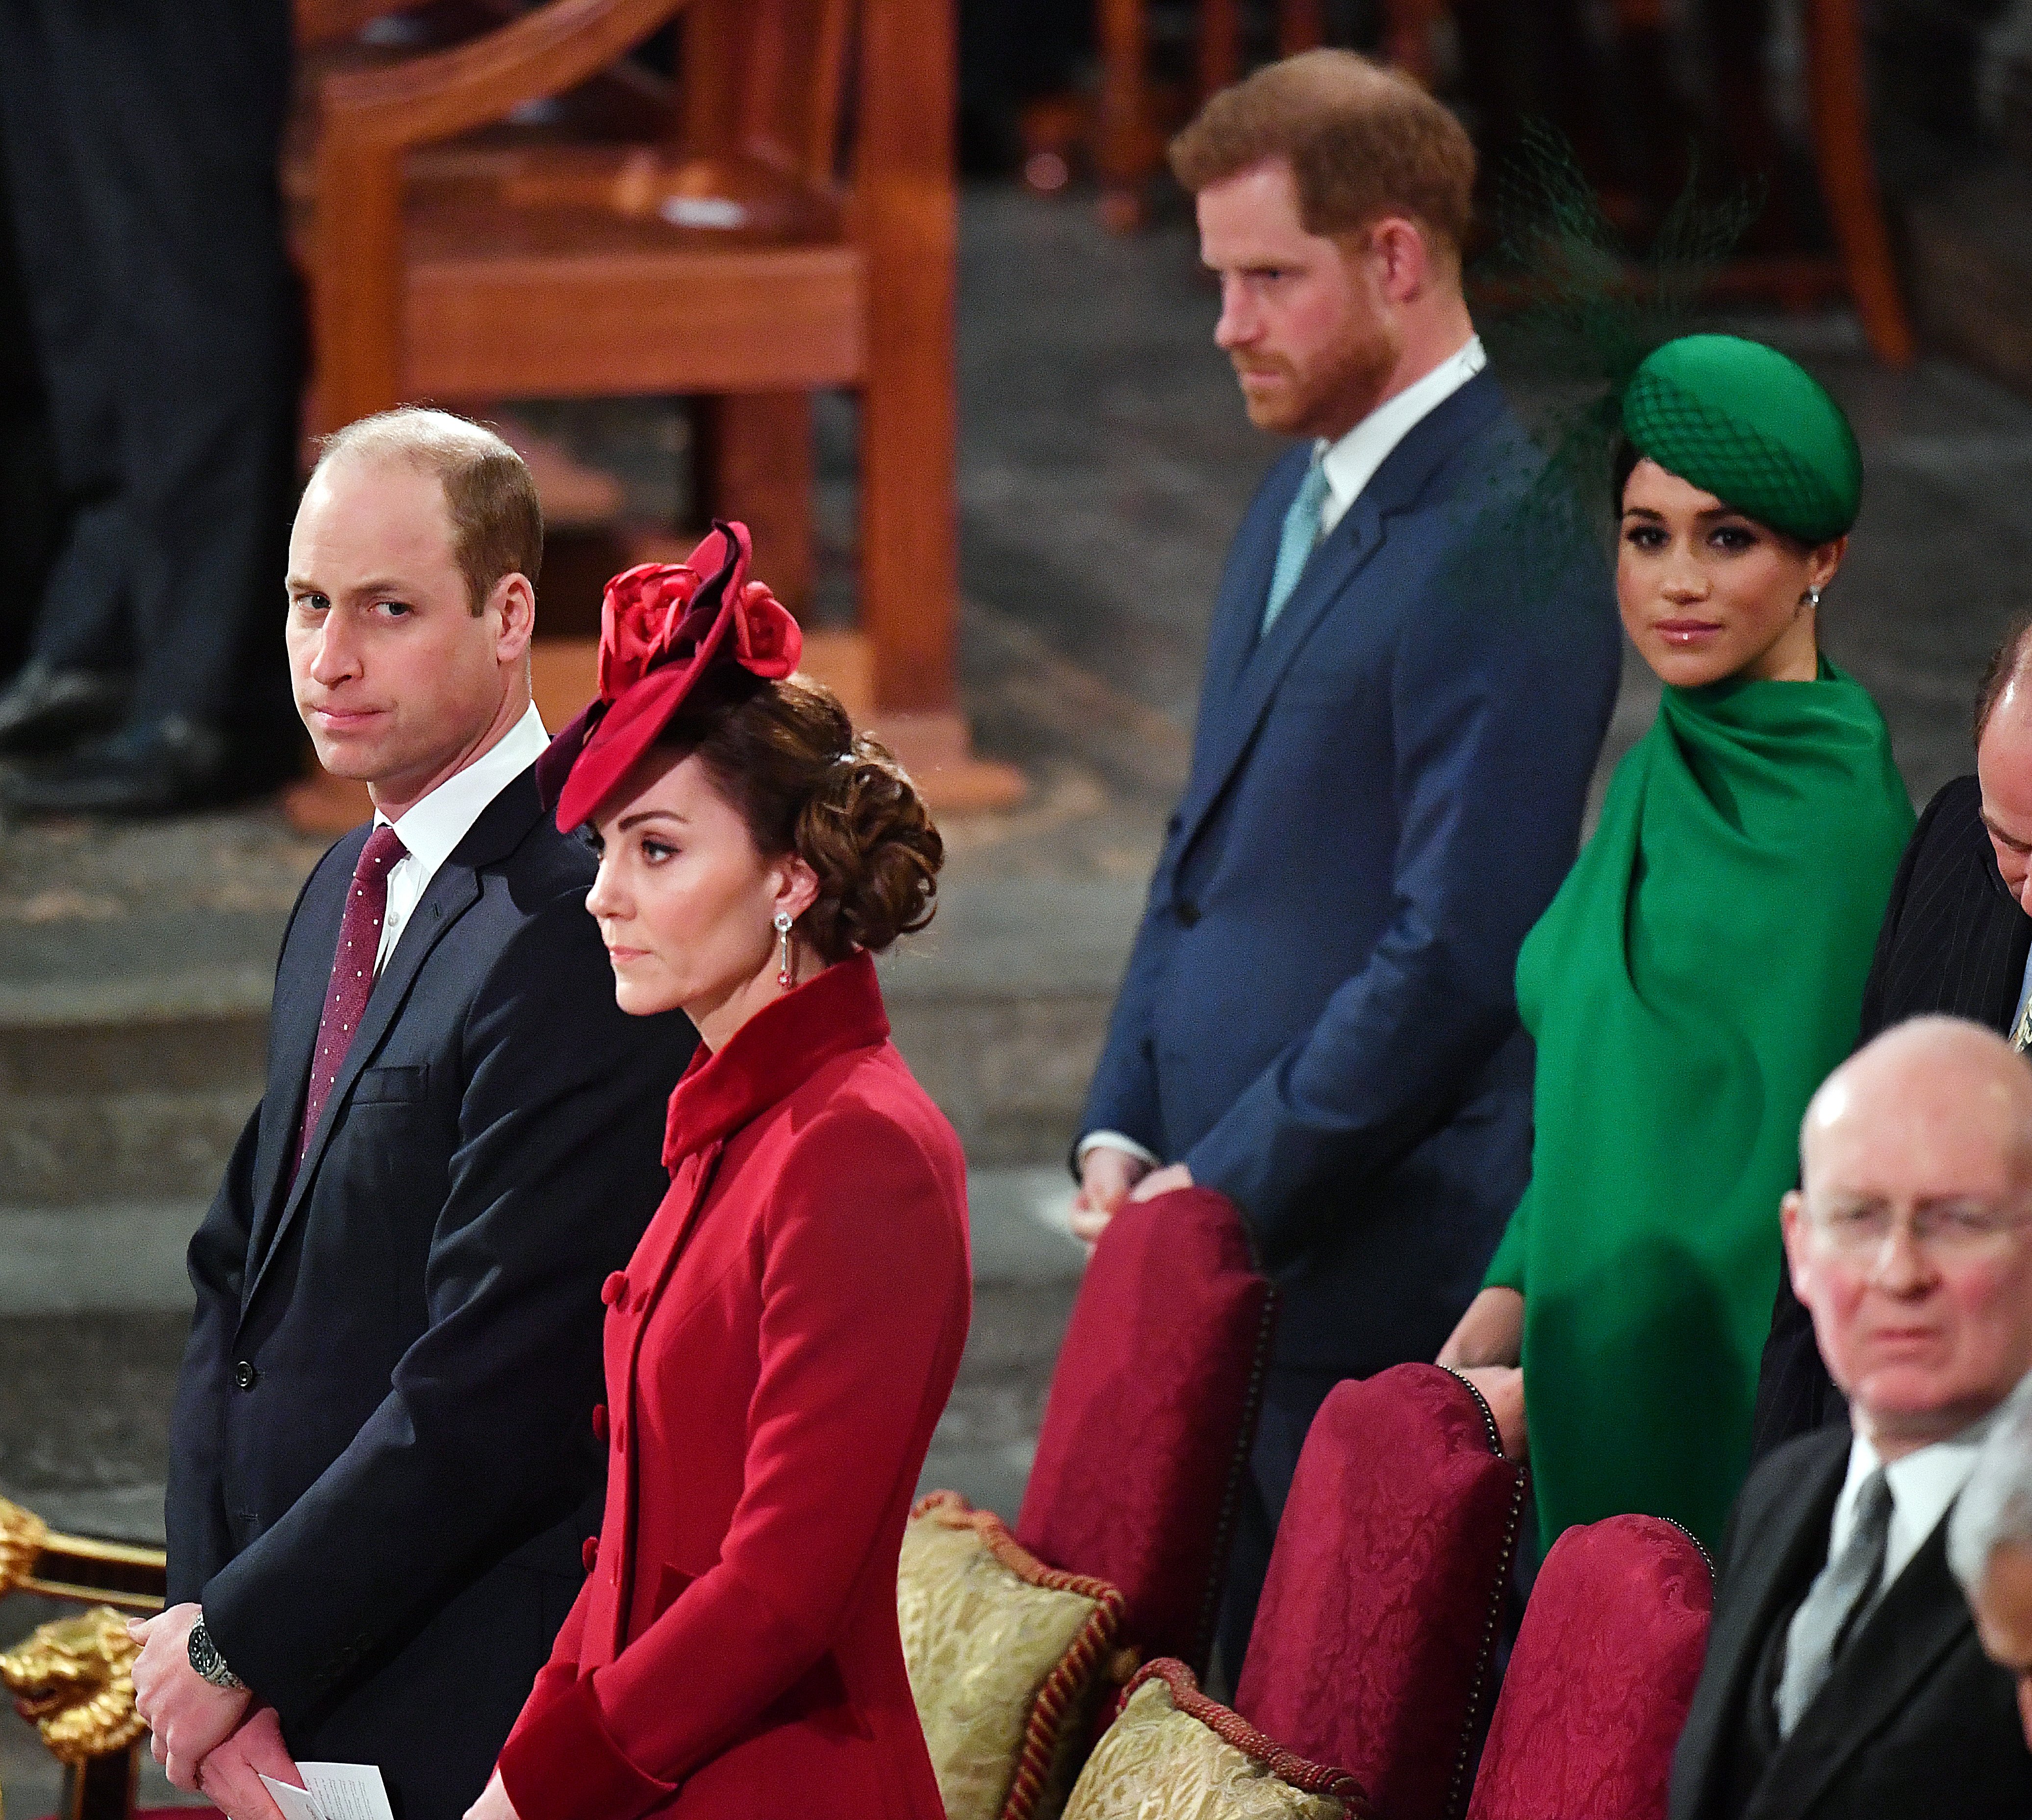 Prince William, Duchess Kate, Prince Harry, and Duchess Meghan at the Commonwealth Day Service on March 9, 2020, in London, England. | Source: Getty Images